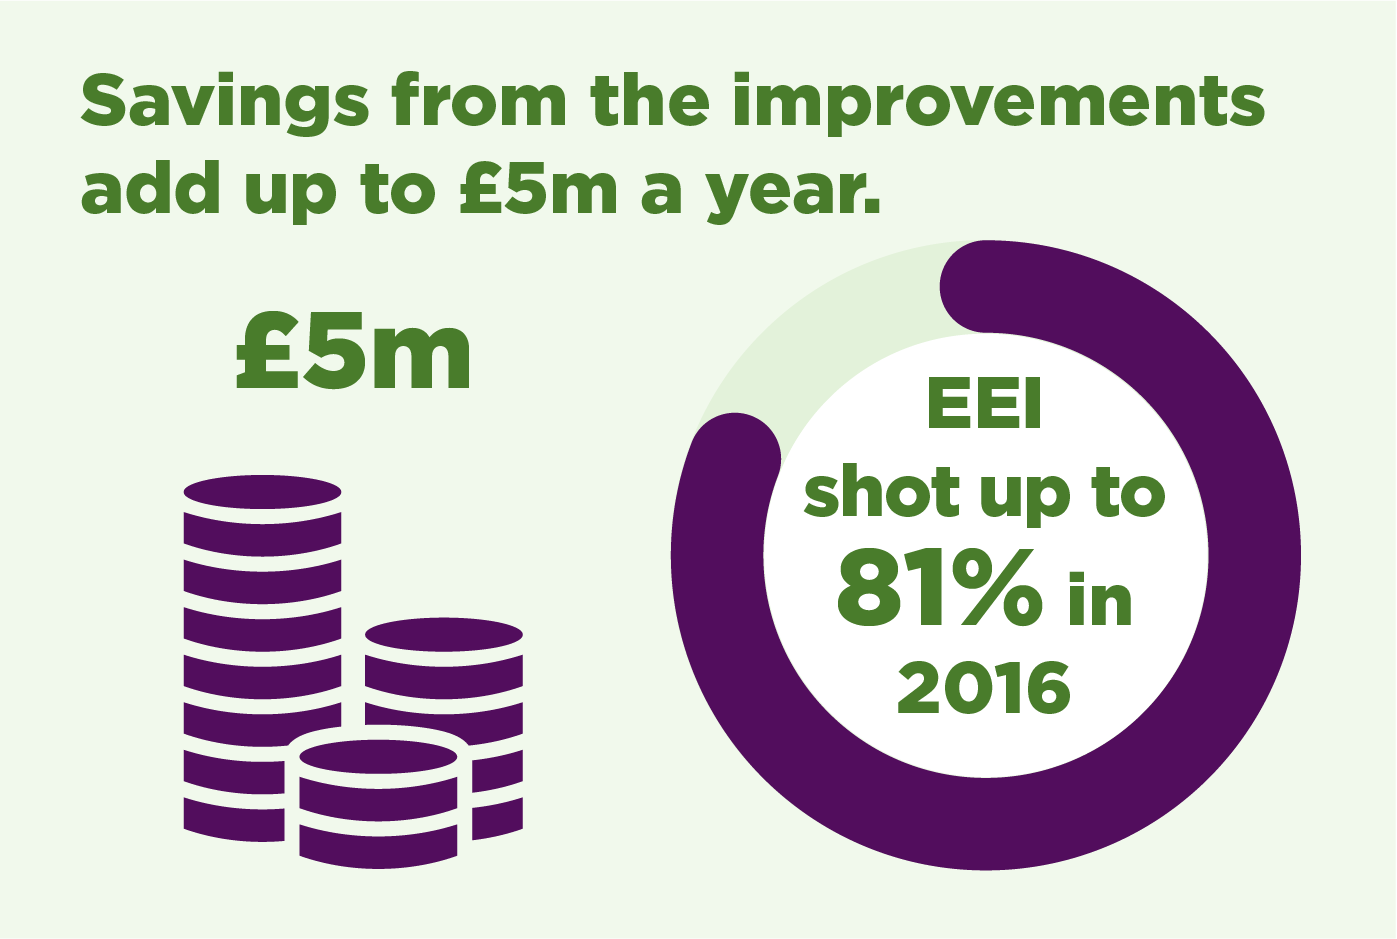 Savings from the improvements add up to £5m a year